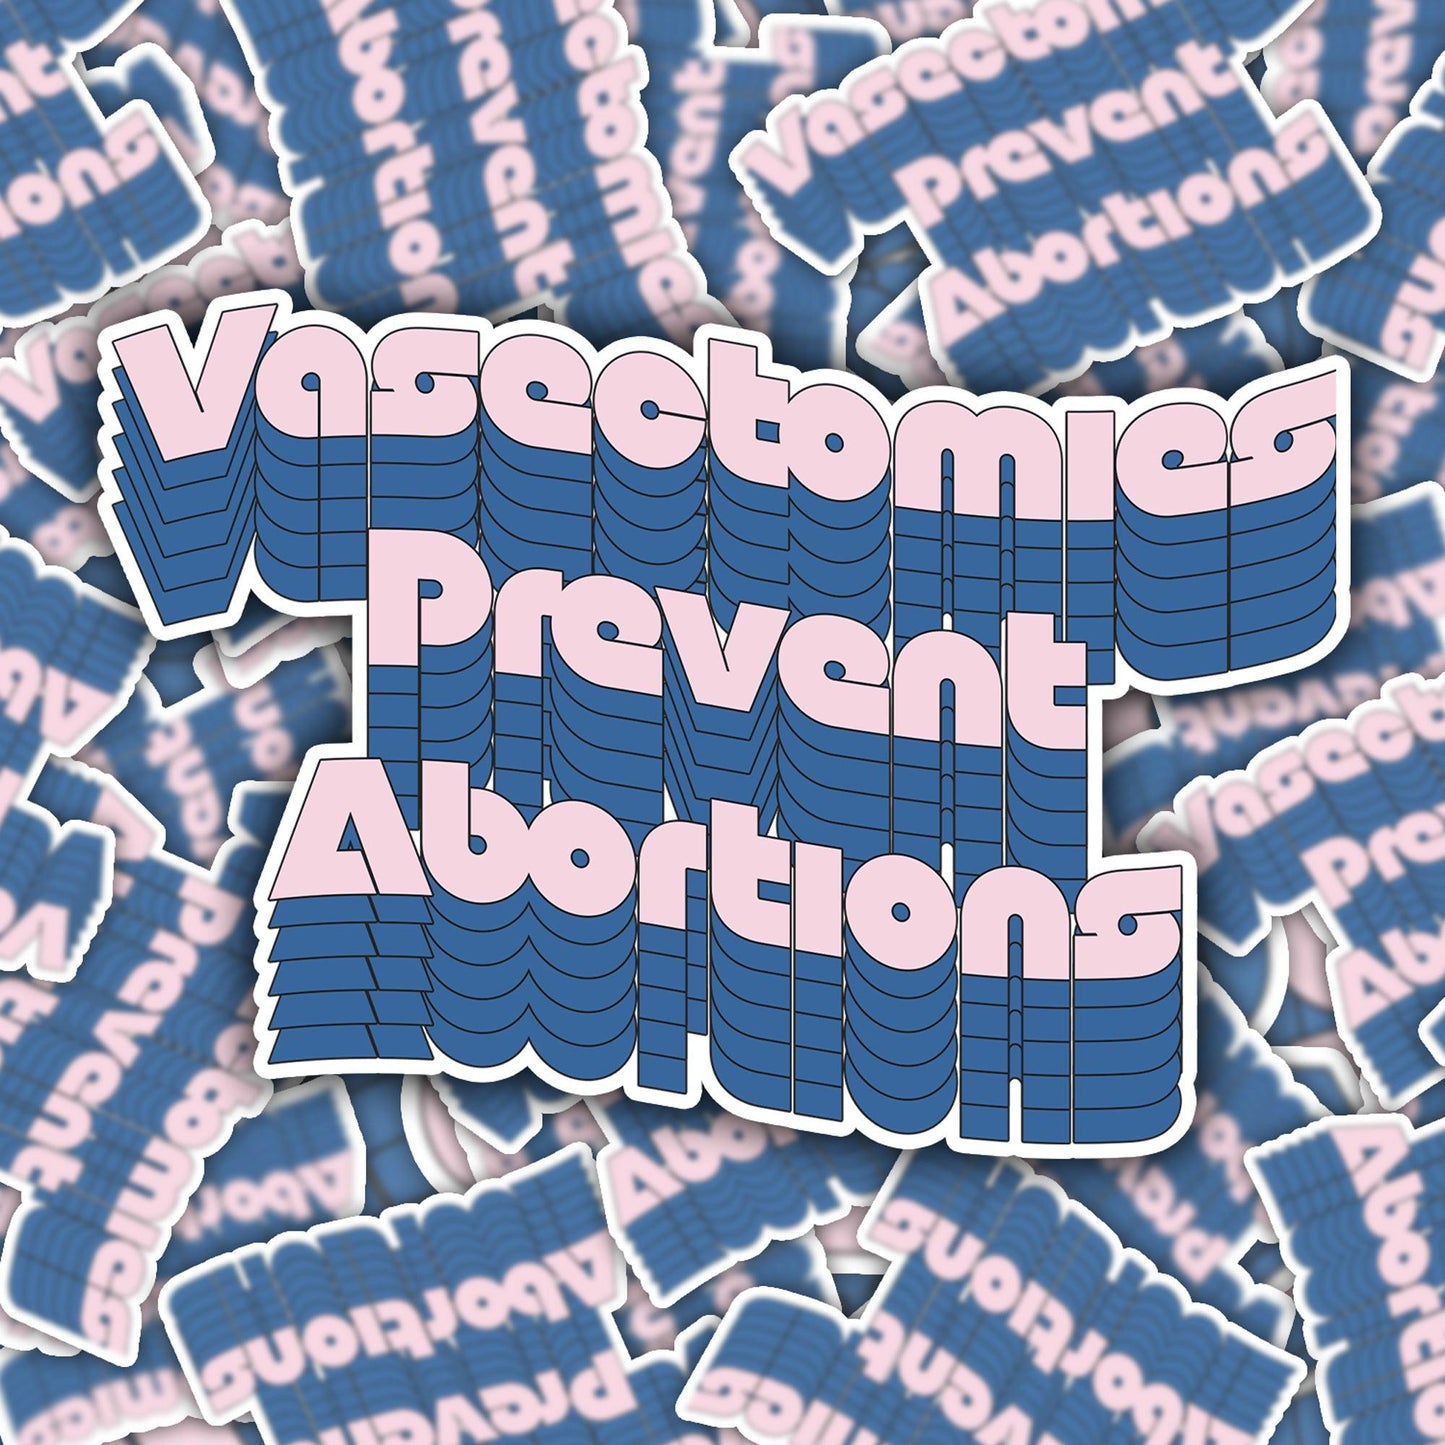 Load image into Gallery viewer, Vasectomies Prevent Abortions Funny Sticker-sticker-Crimson and Clover Studio
